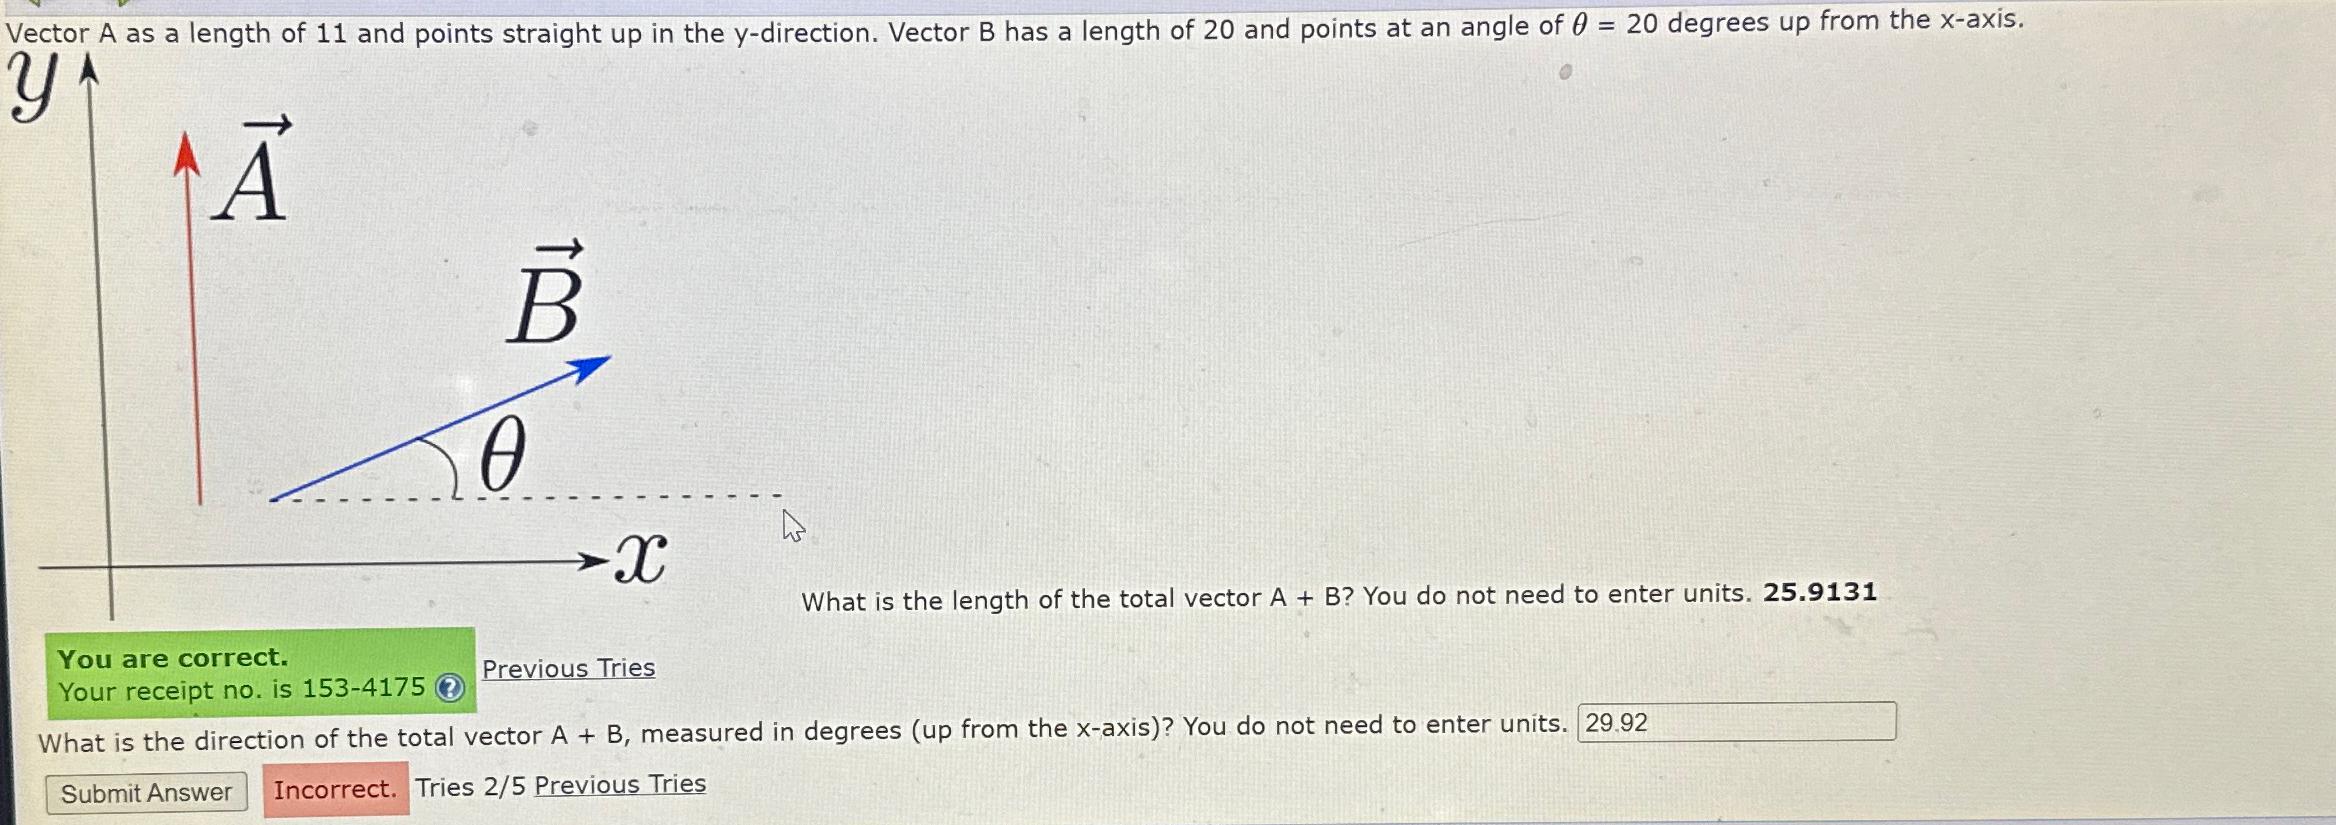 Vector A as a length of 11 and points straight up in the y-direction. Vector B has a length of 20 and points